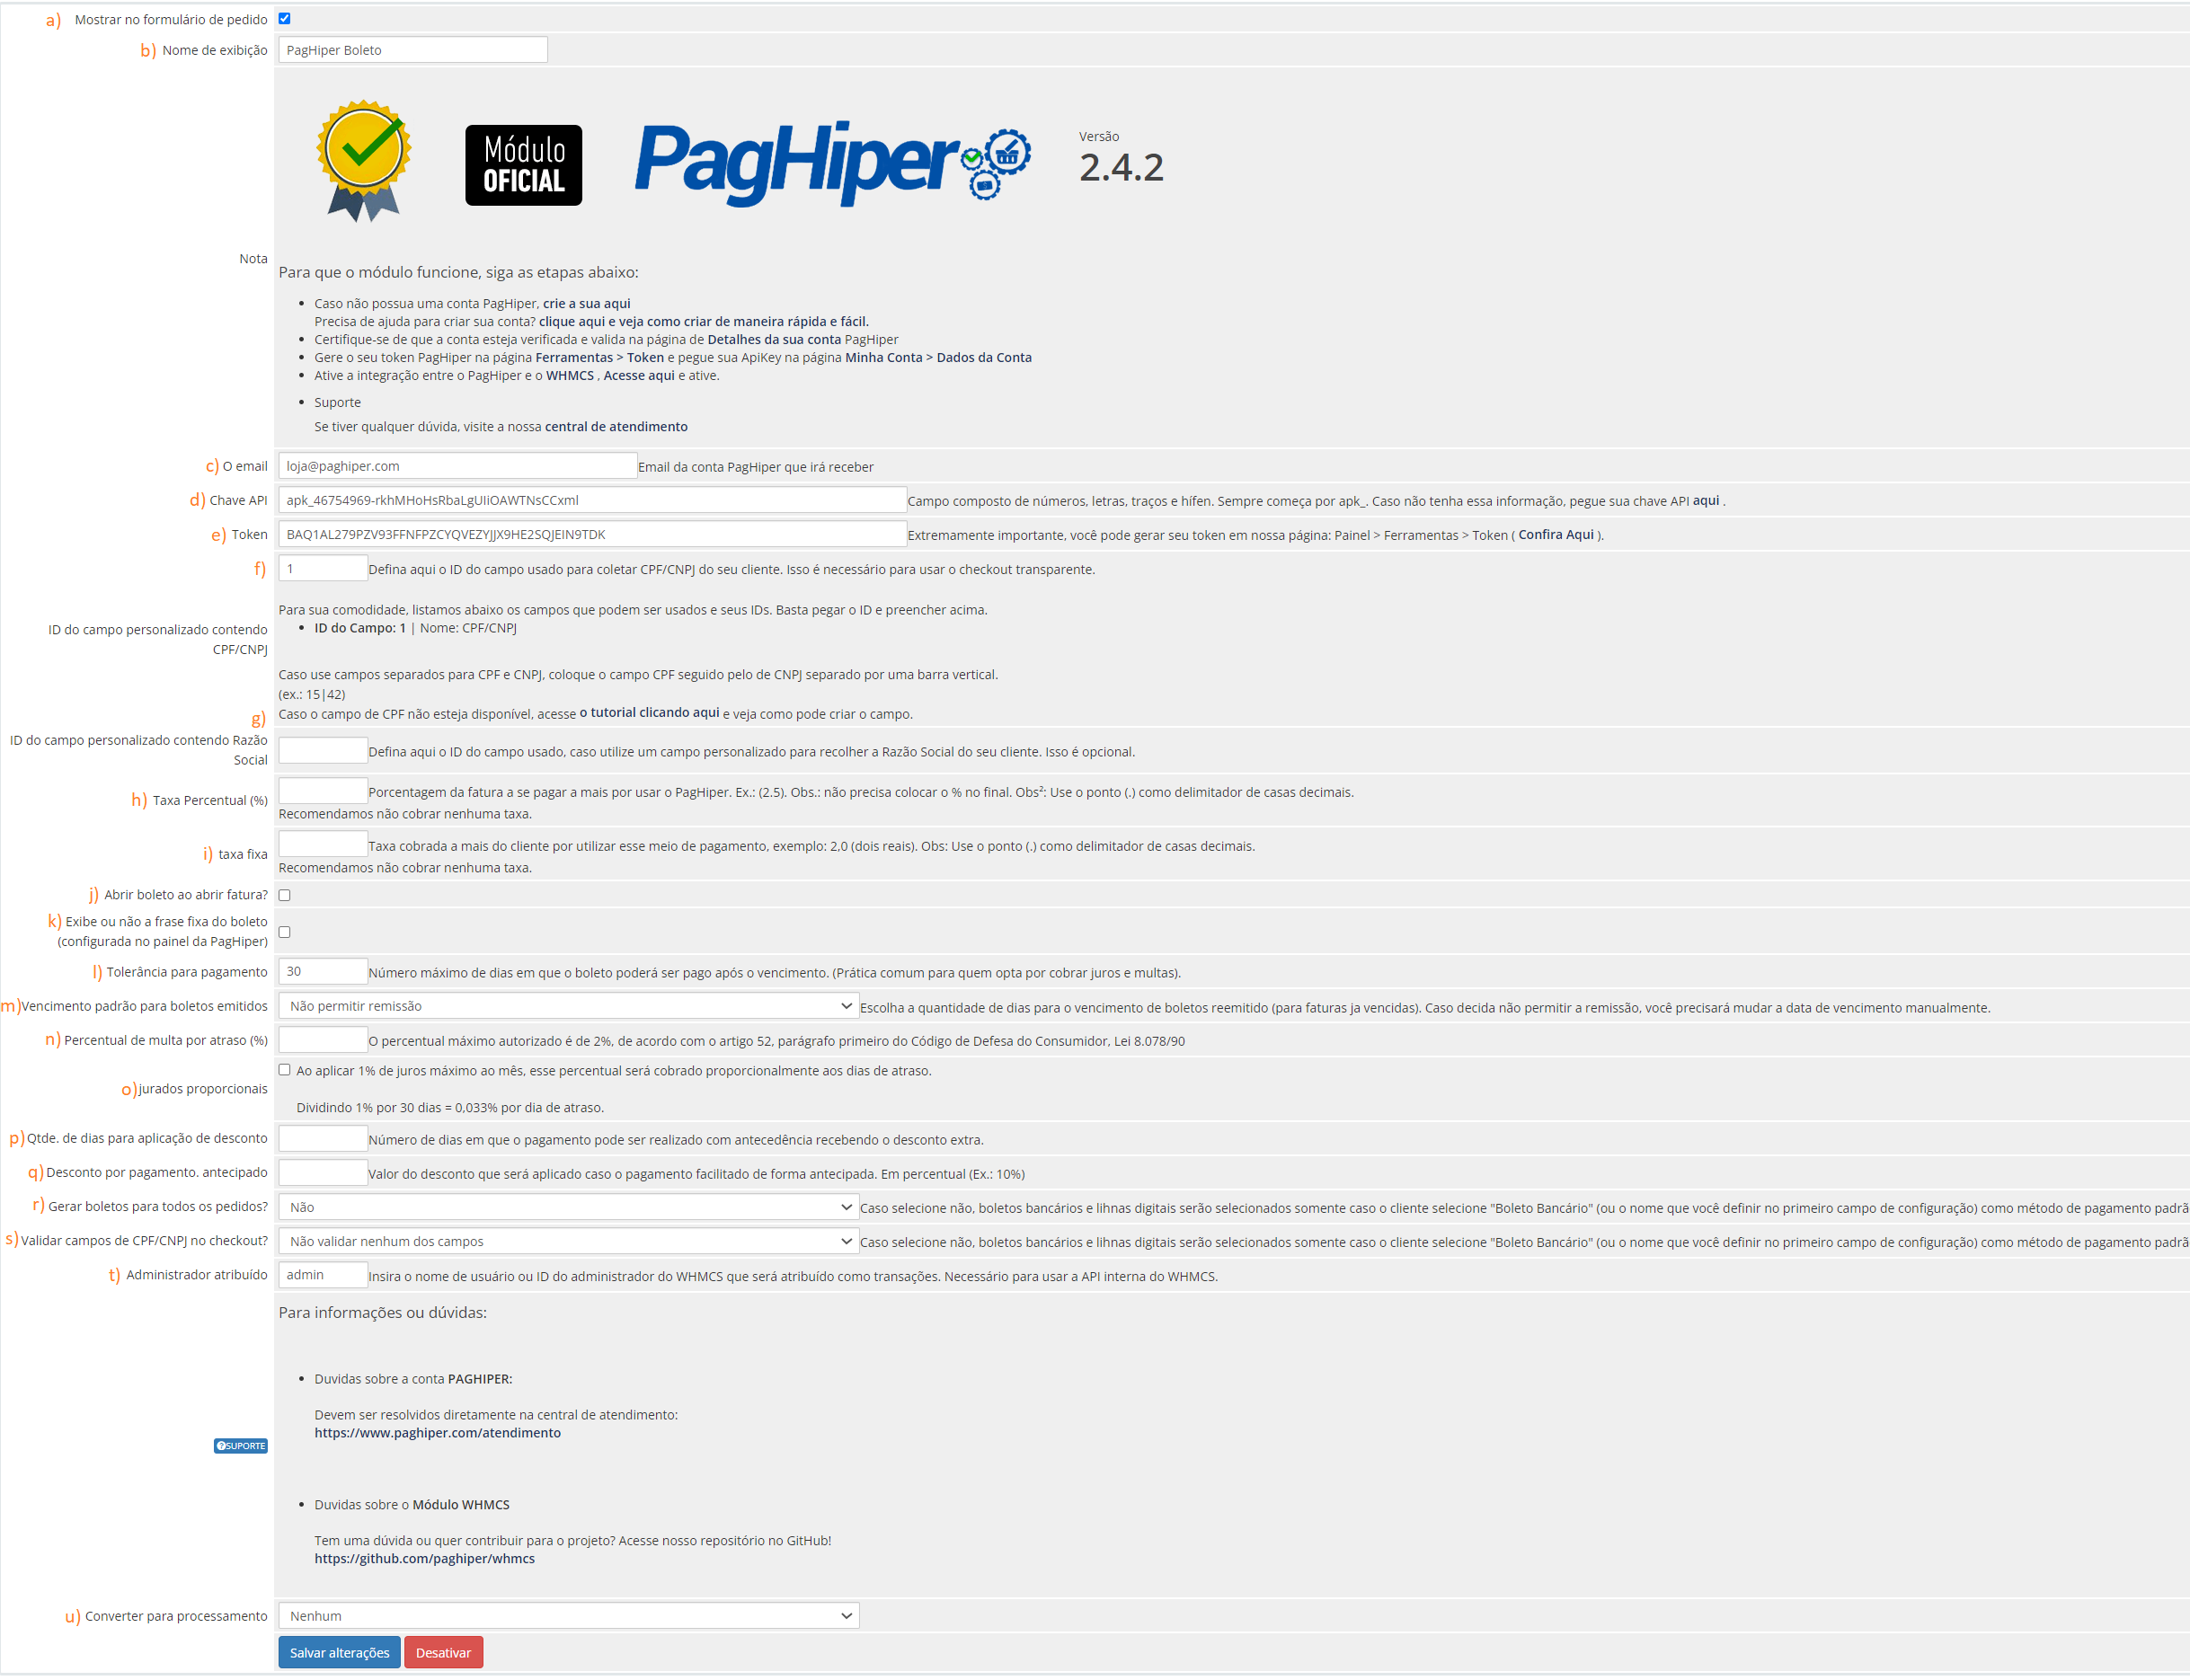 app-paghiper-configuracao.png